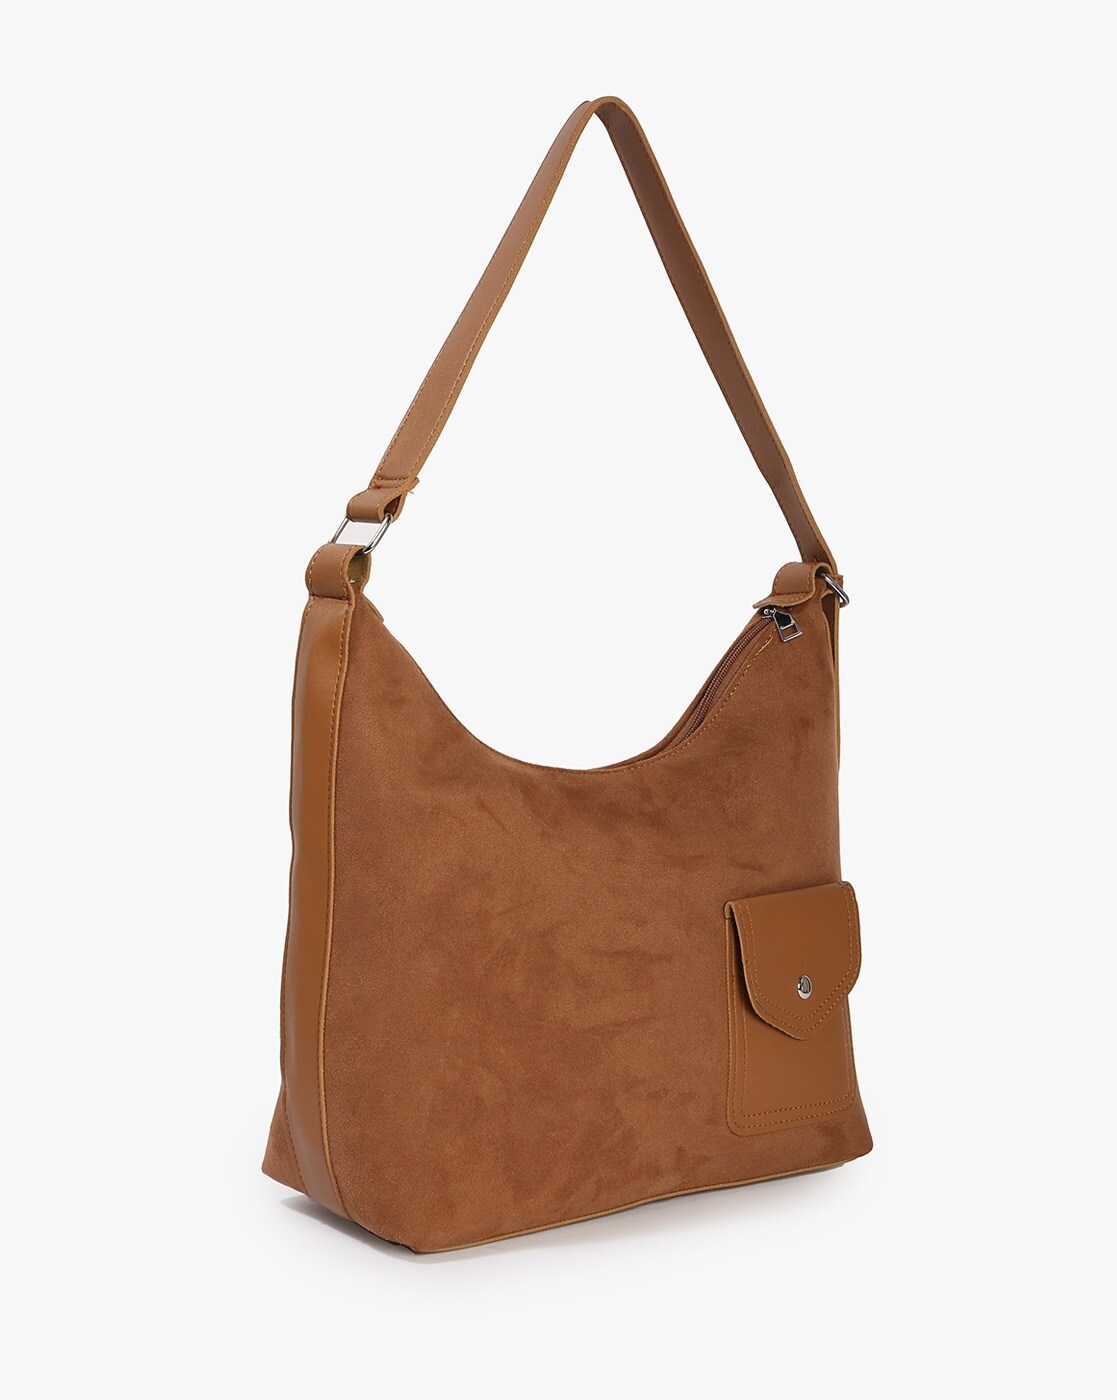 Barrels And Oil Hobo Bag with Adjustable Strap For Women (Tan, OS)